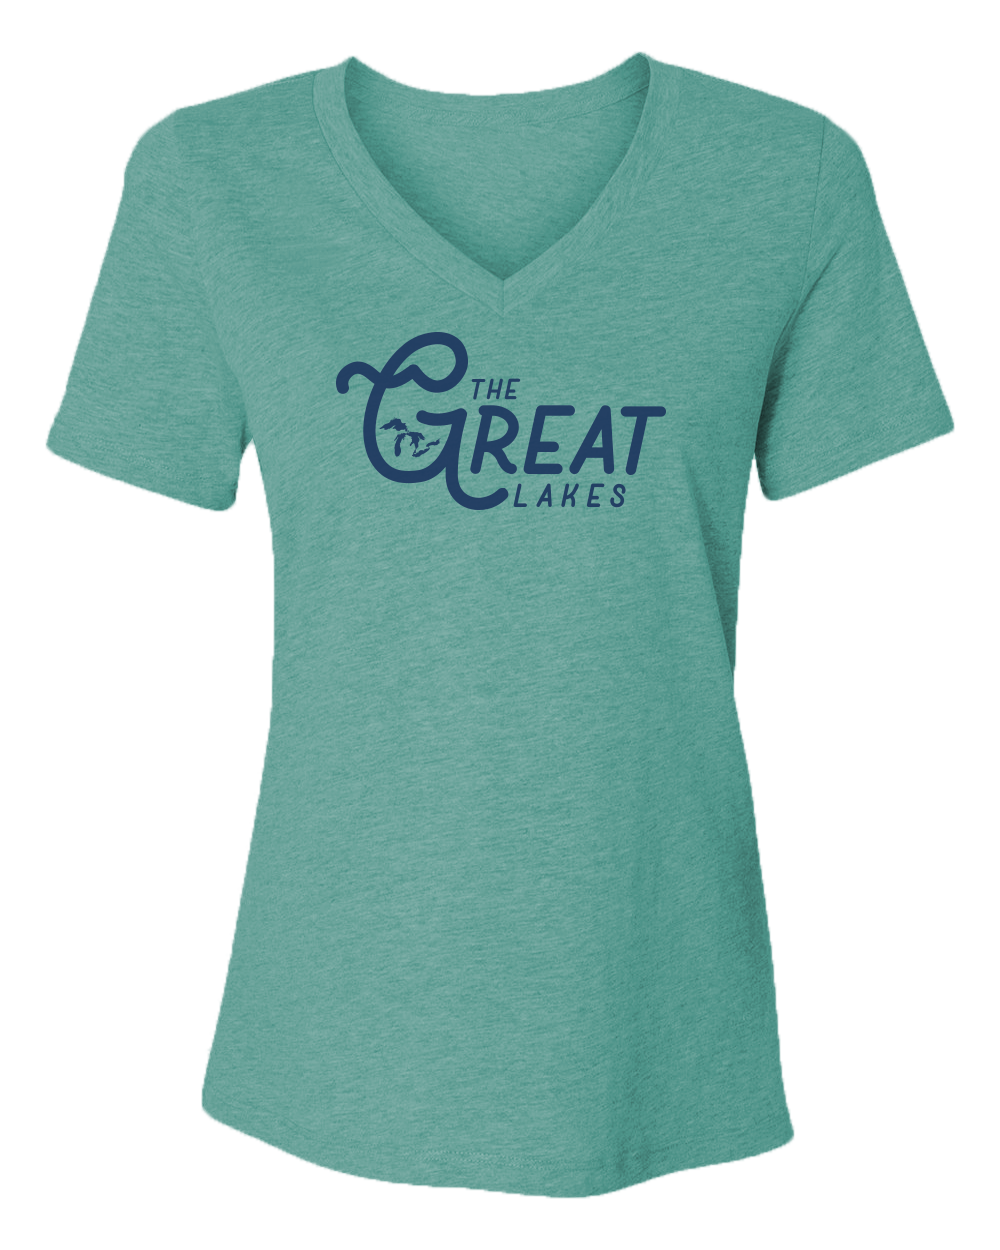 The Great Lakes Women's V-Neck Tee